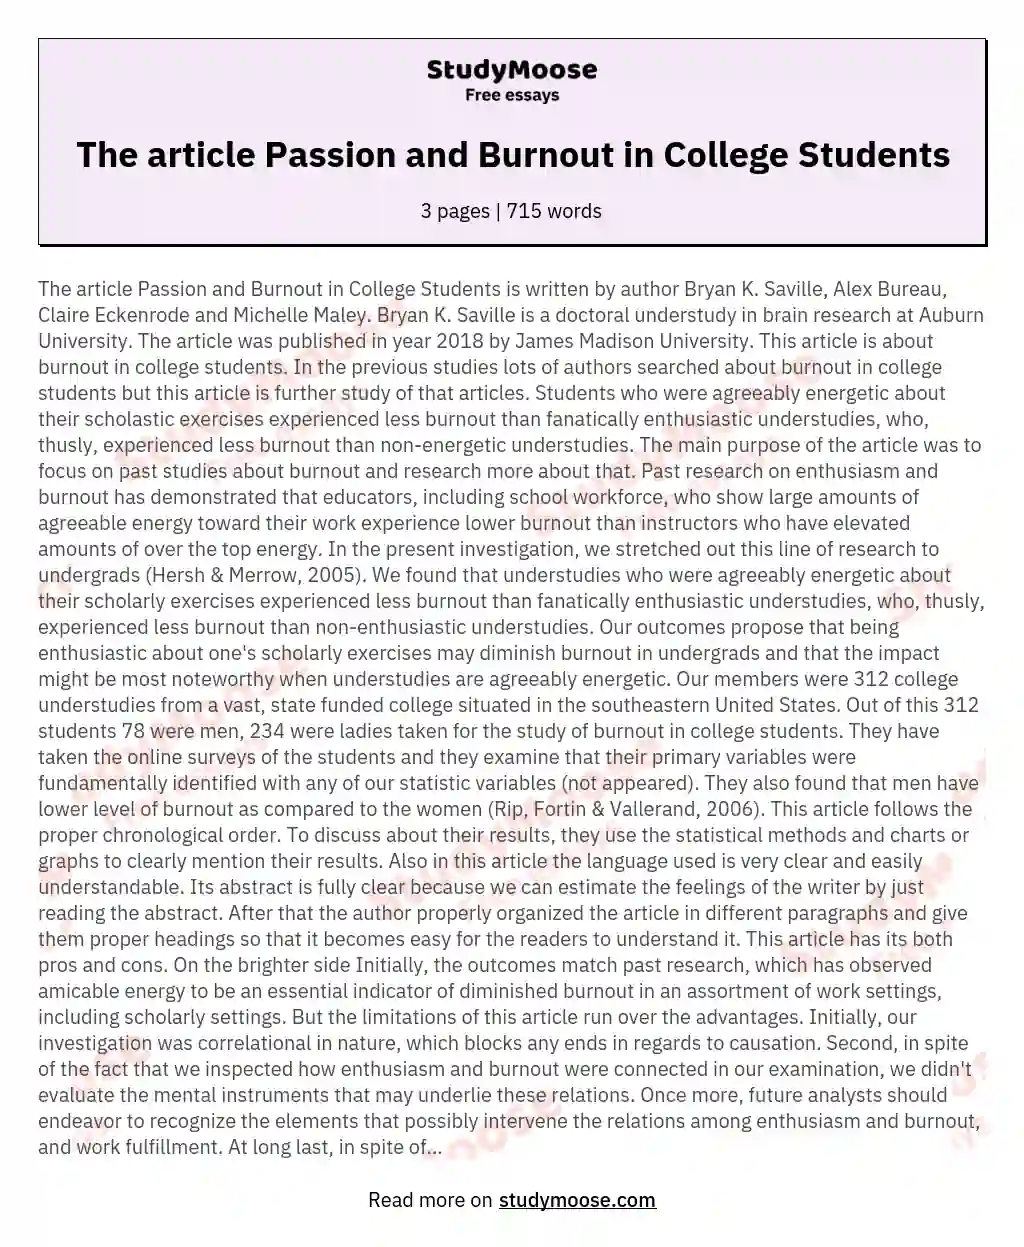 The article Passion and Burnout in College Students